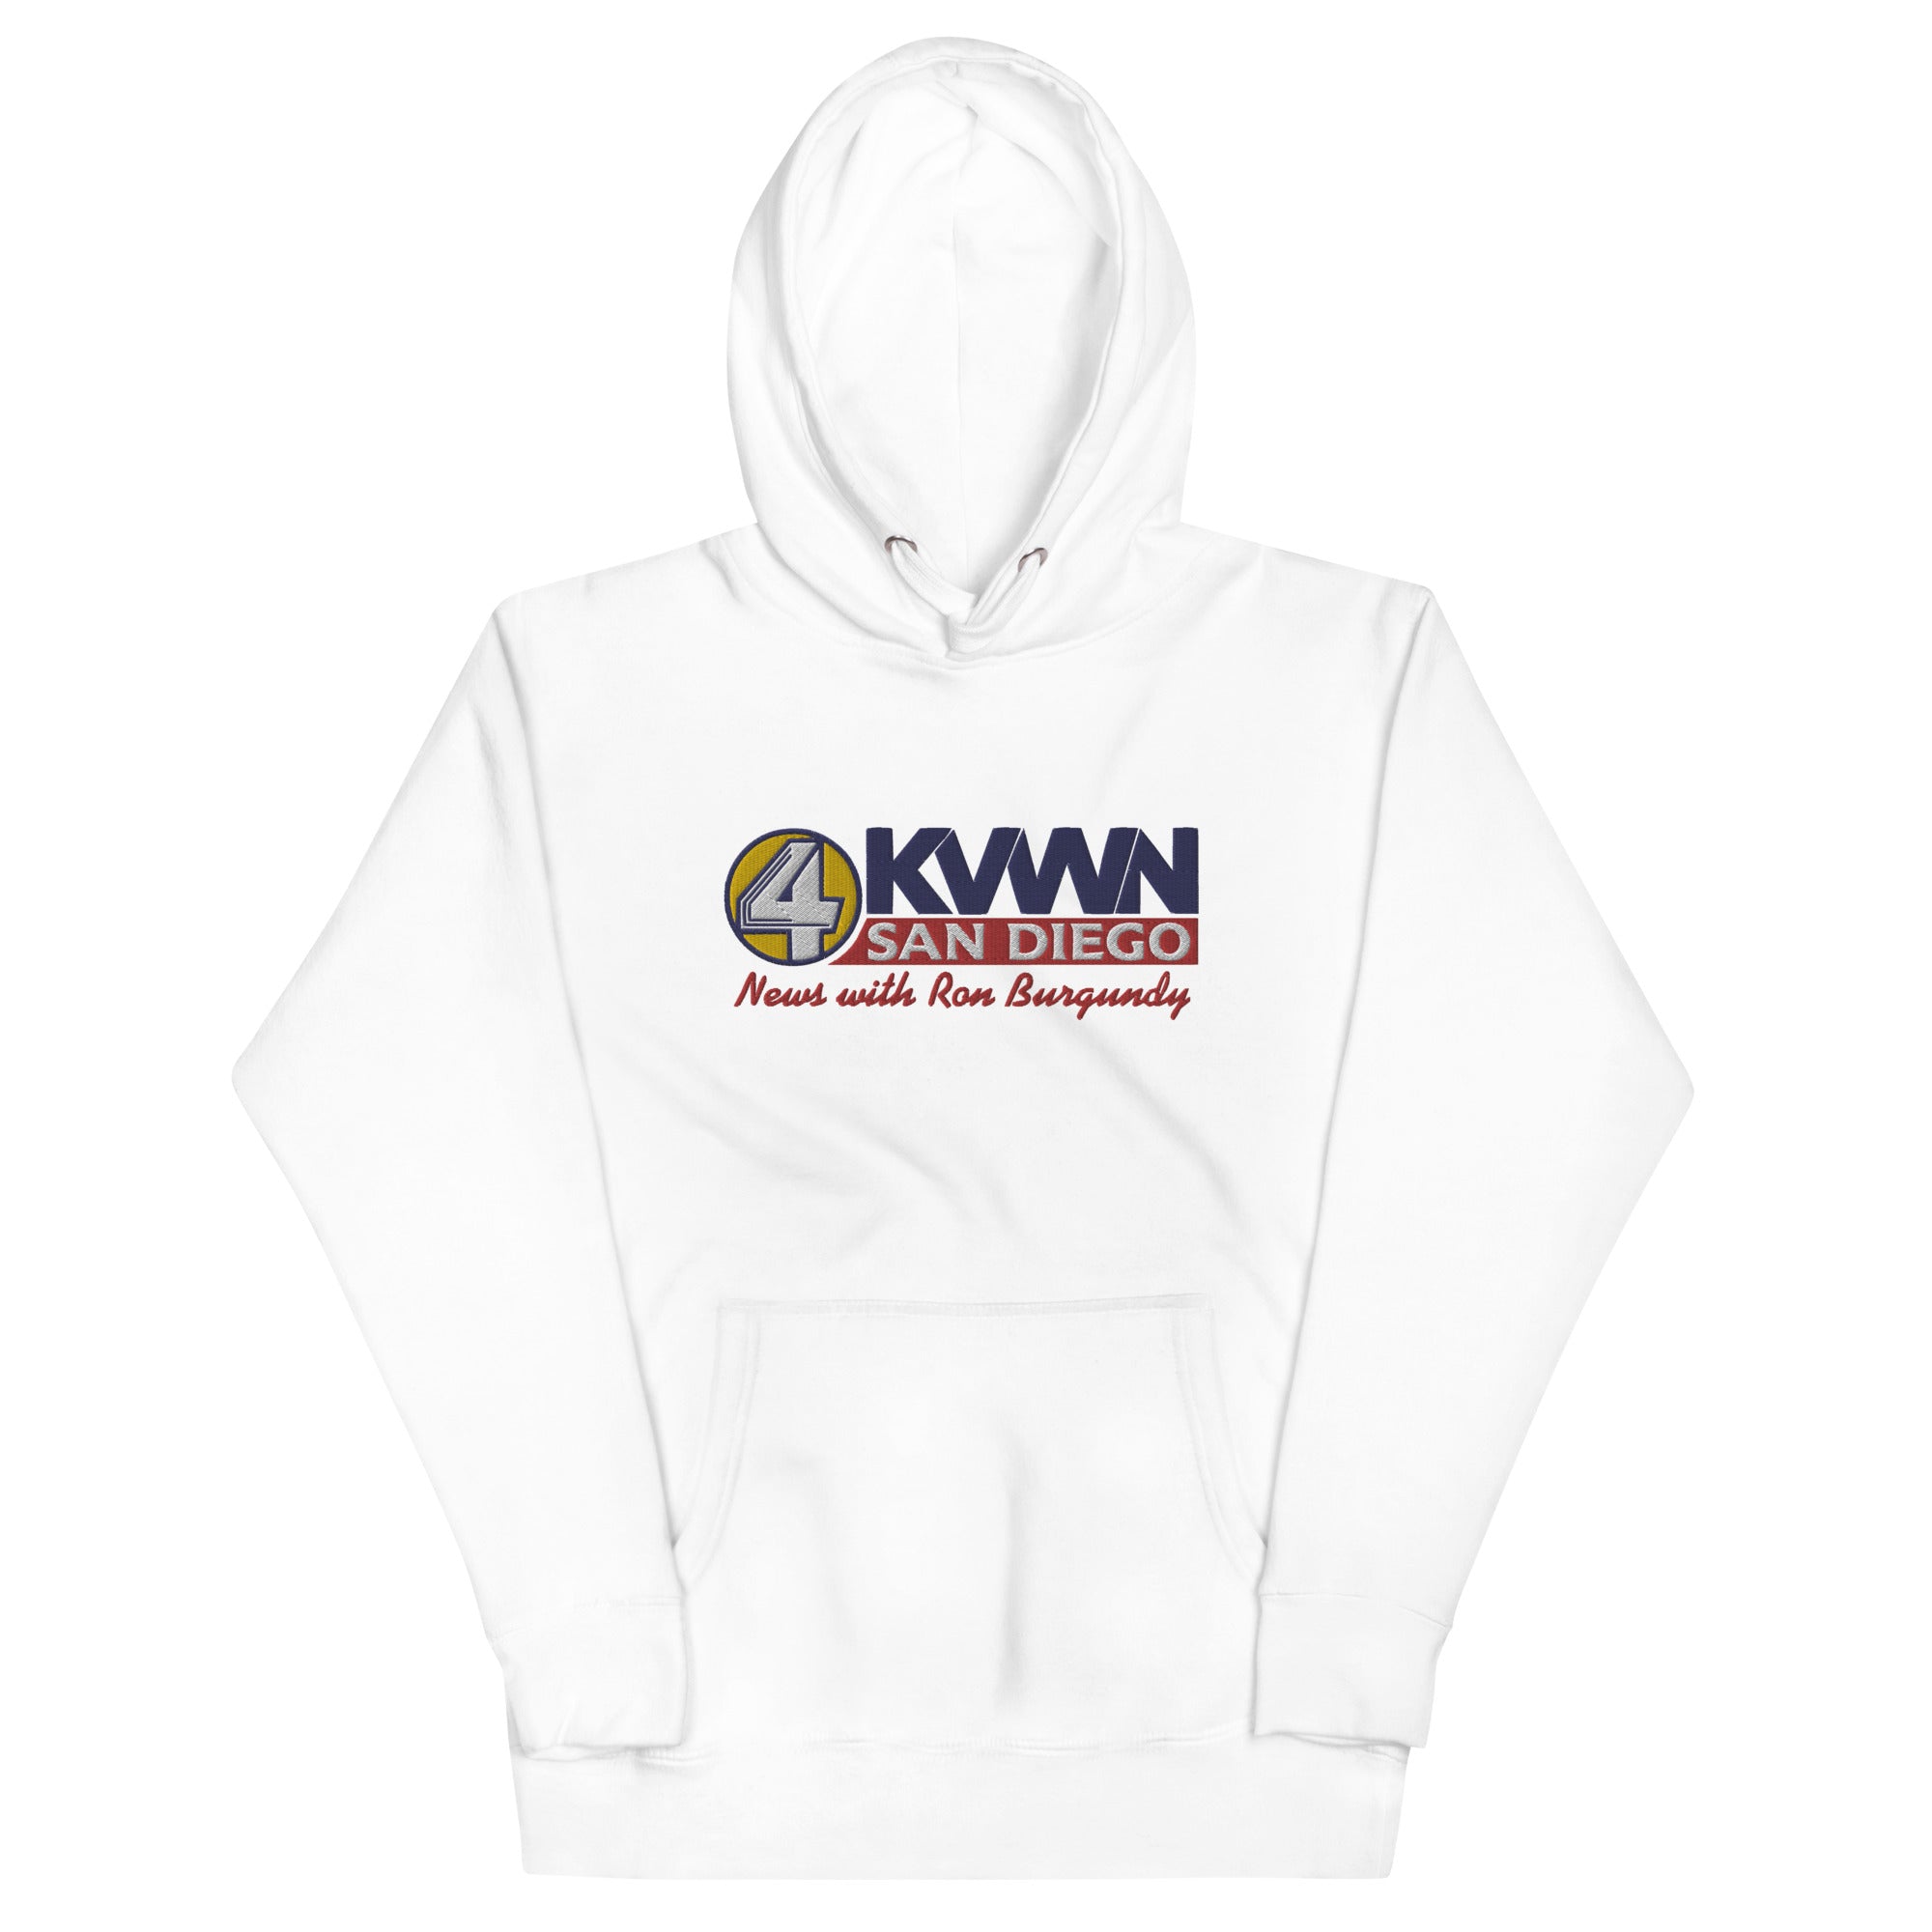 KVWN News with Ron Burgundy Embroidered Hoodie